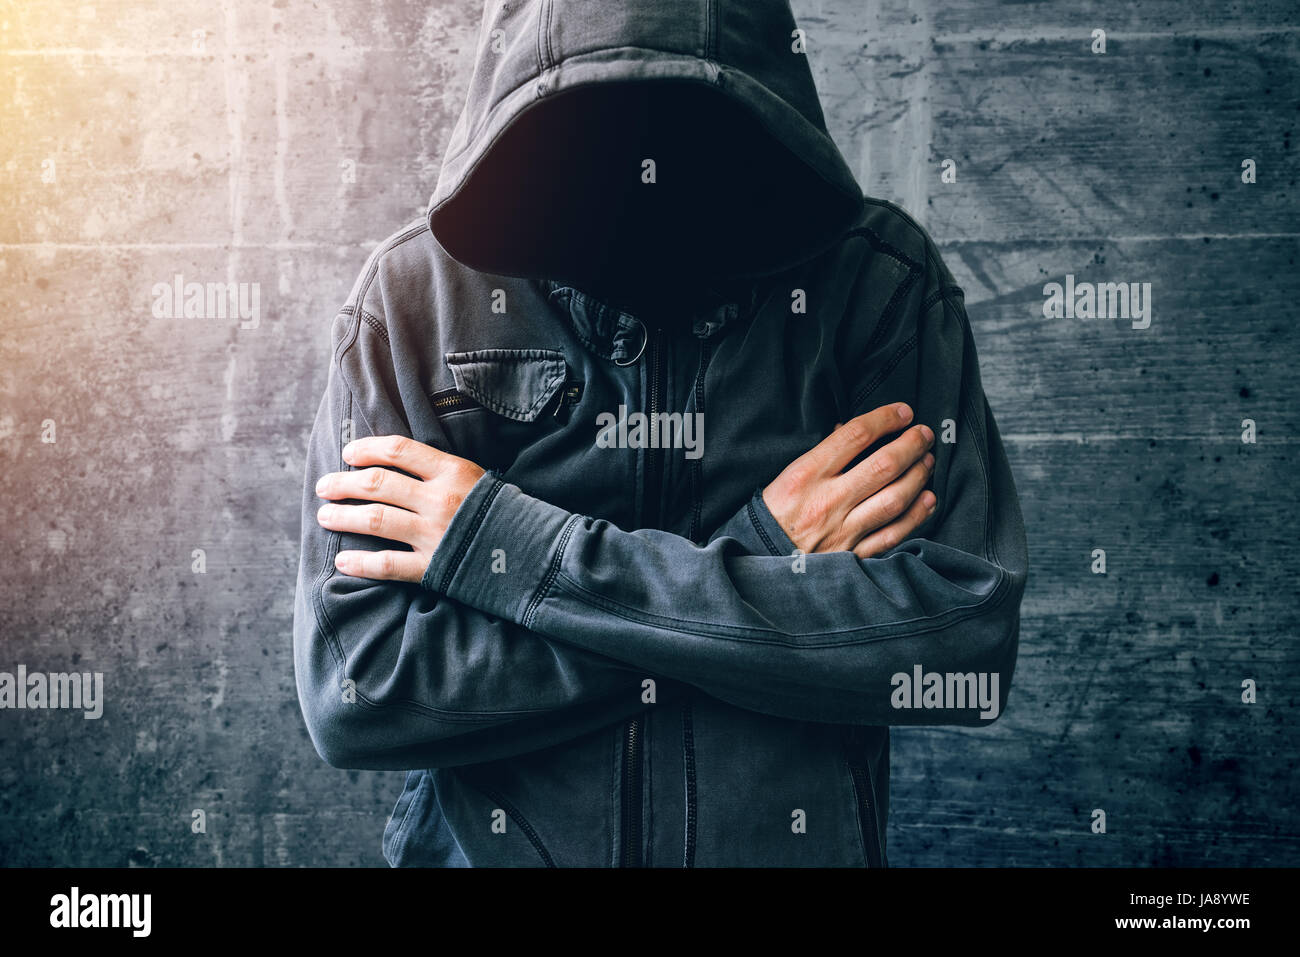 Hopeless drug addict going through addiction crisis, portrait of young adult person with substance dependence after long term drug and medication abus Stock Photo